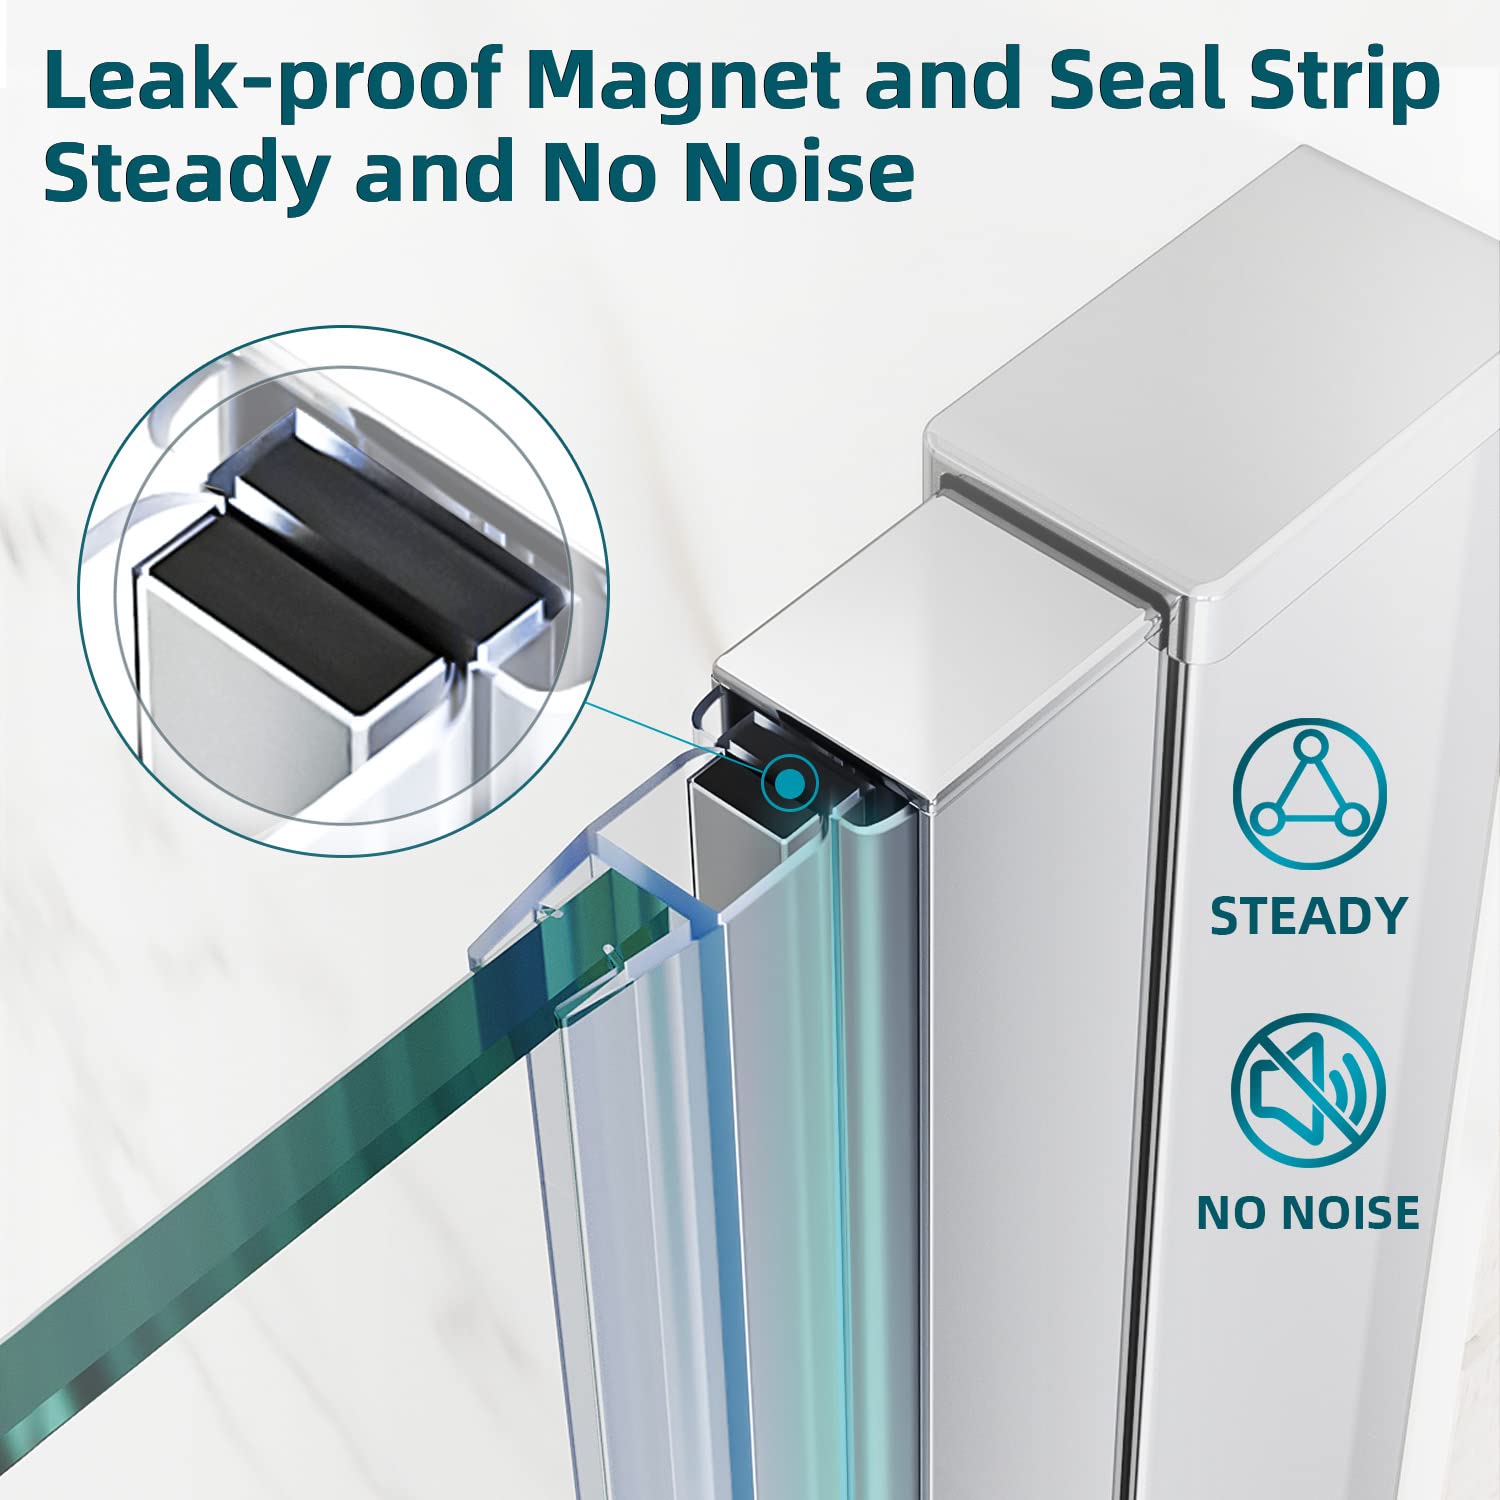 leak proof magnet and seal strip steady and no noise